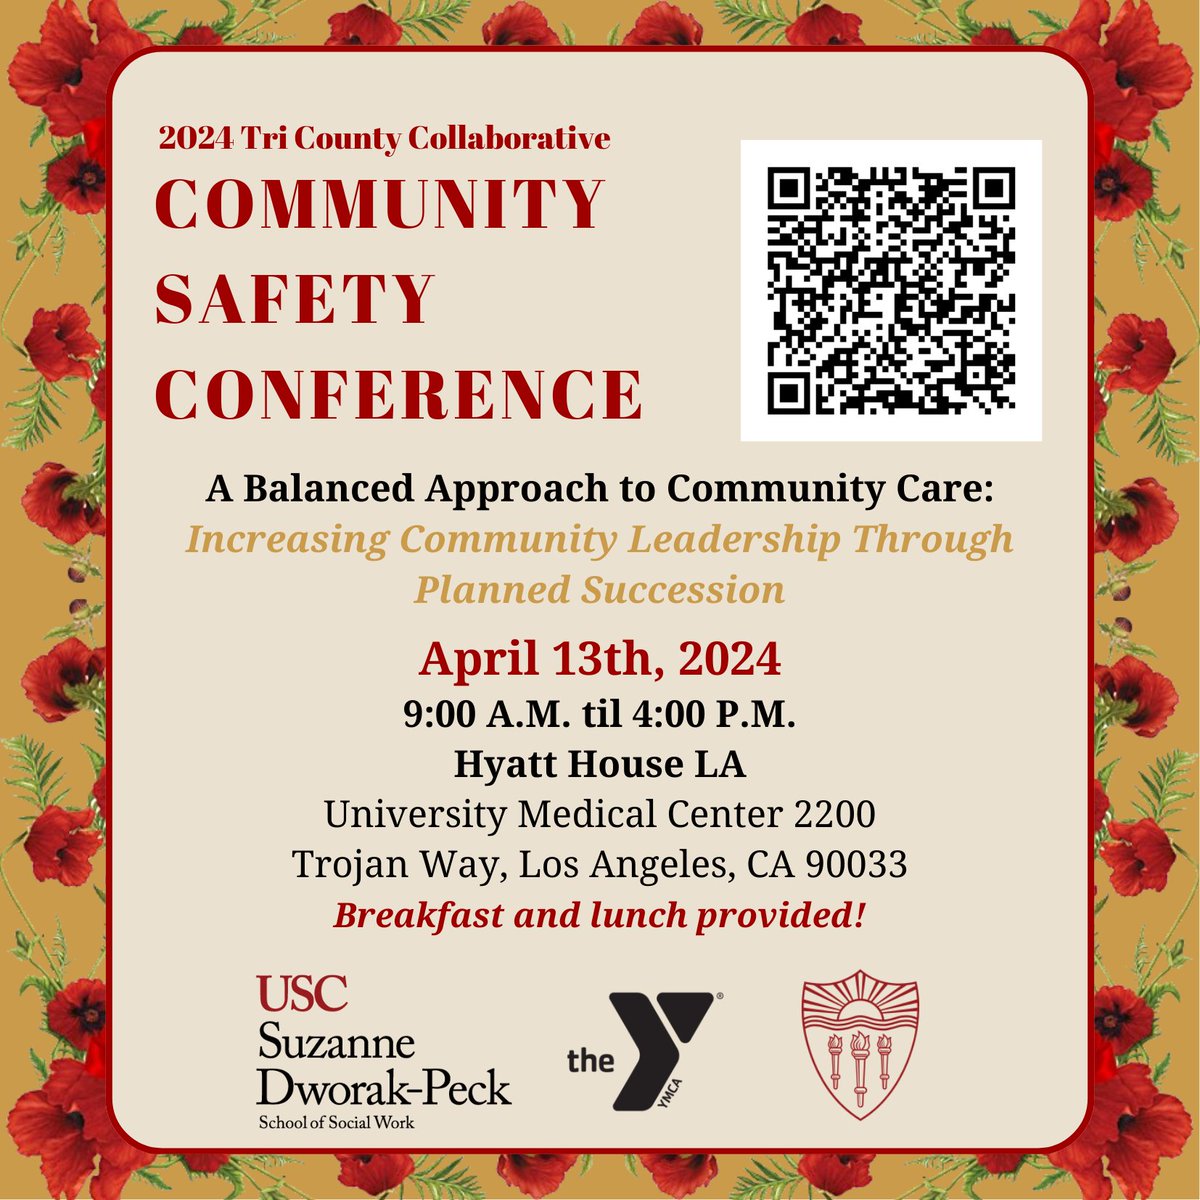 RSVP now to attend the upcoming 2024 Spring Tri-County Collaborative Community Safety Conference on April 13th which offers a unique opportunity to build capacity with non-profits, interdict community violence, and increase community leadership. RSVP: bit.ly/43NVWbQ